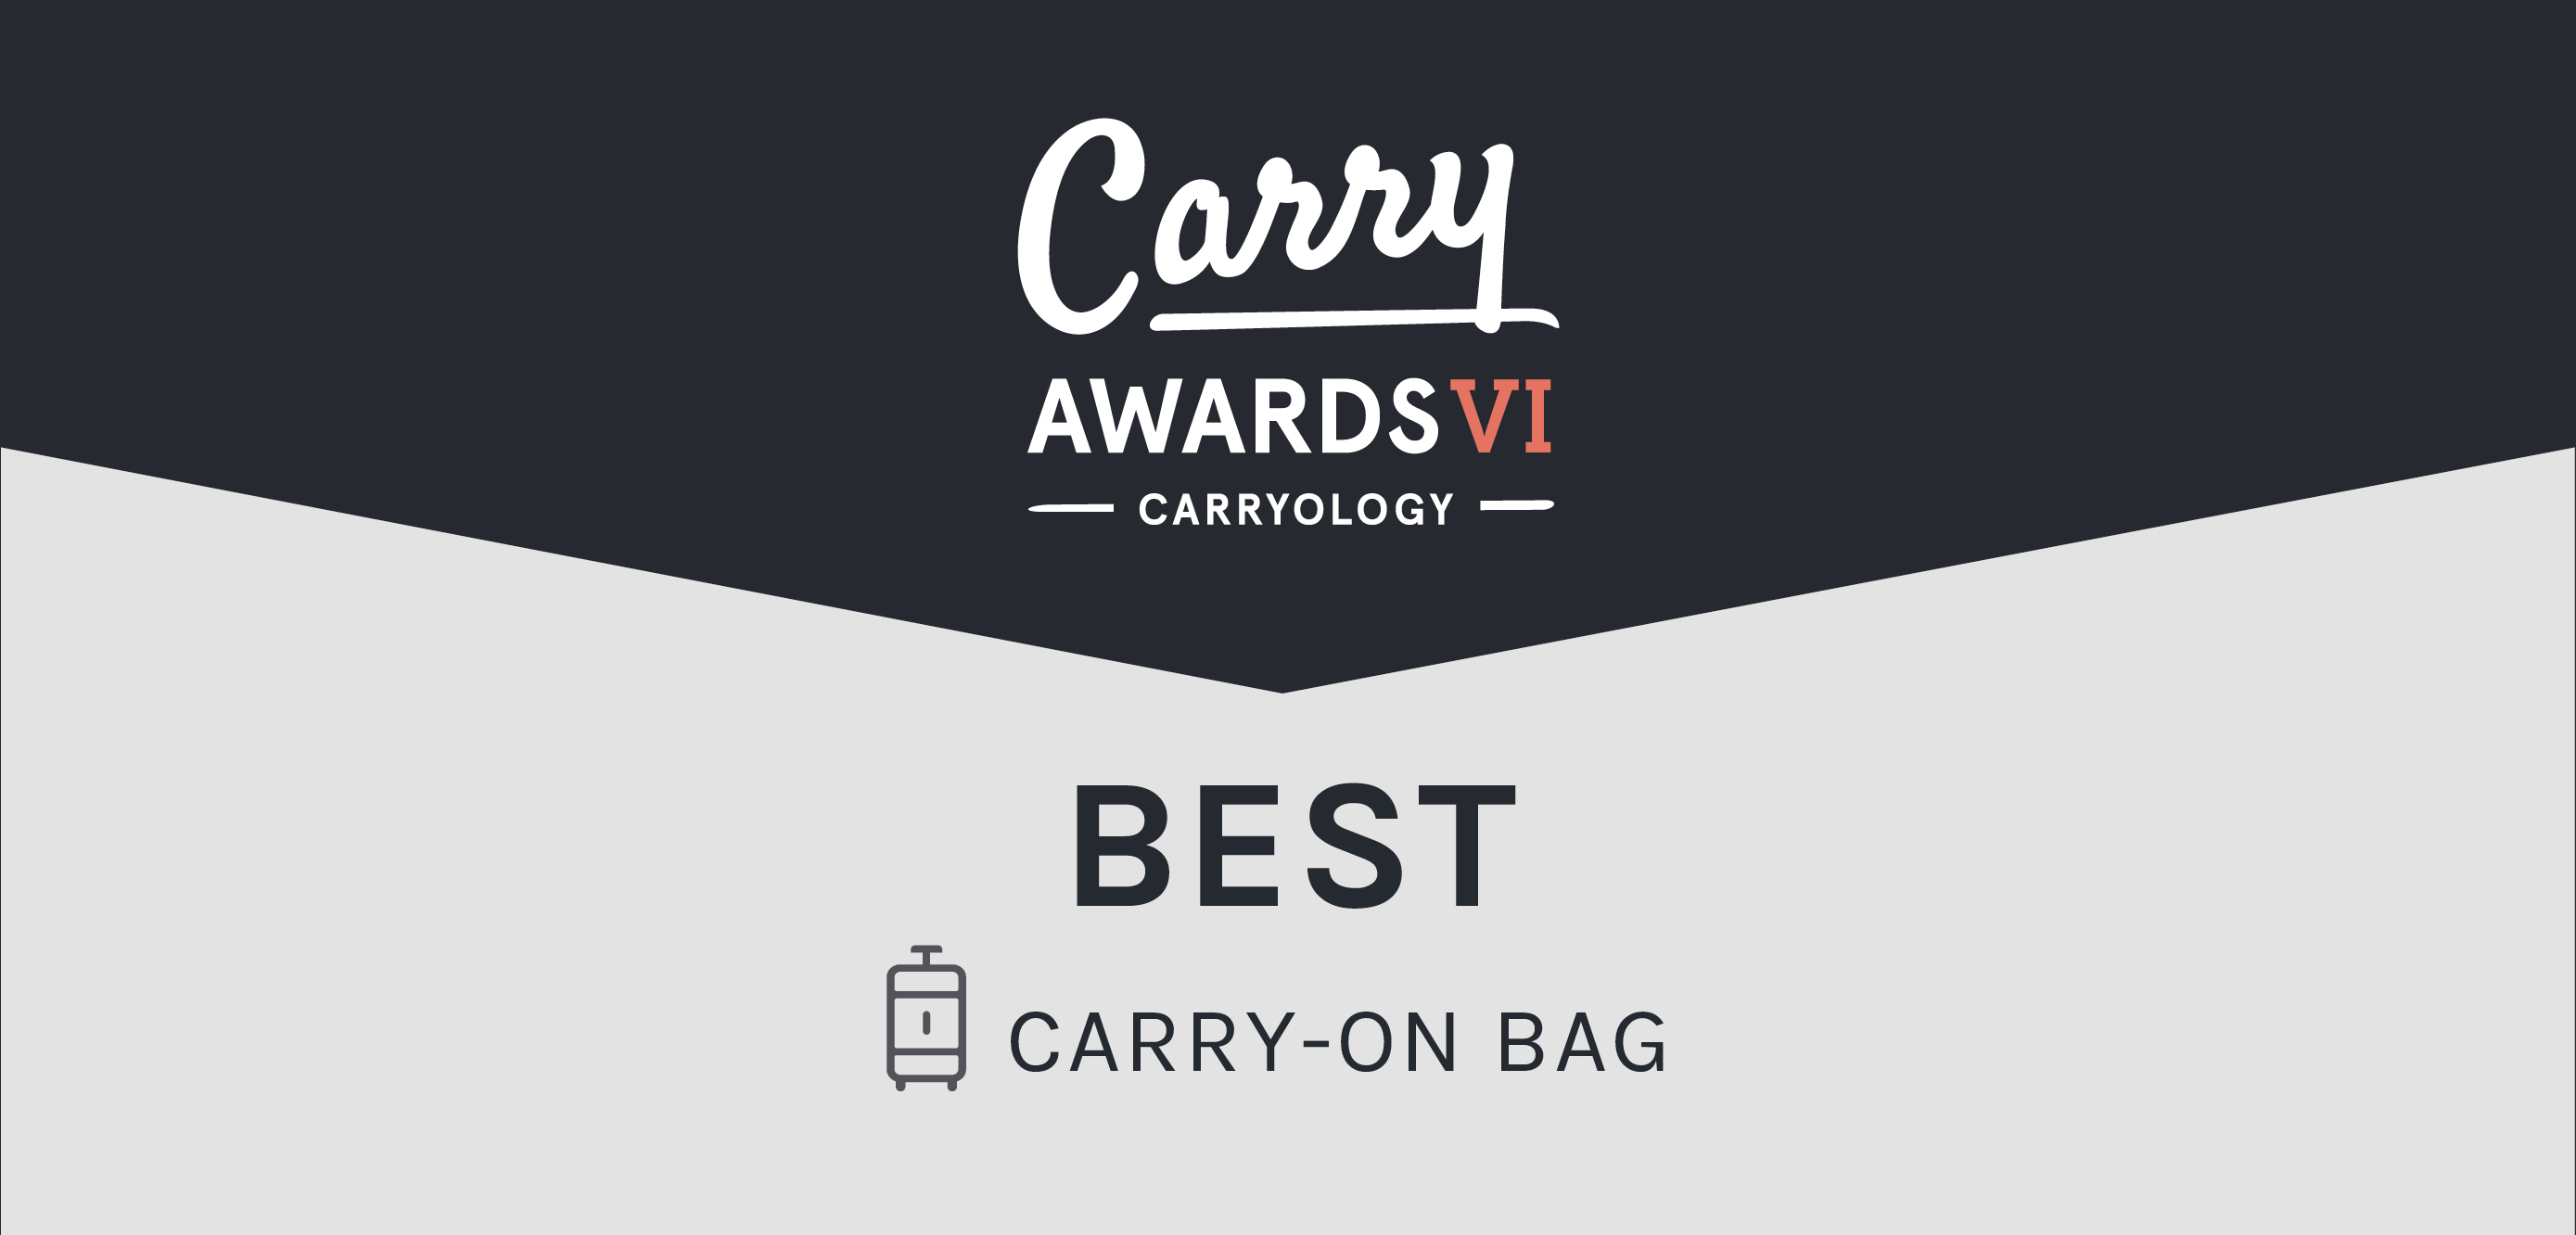 Best Carry On Bag - Carry Awards